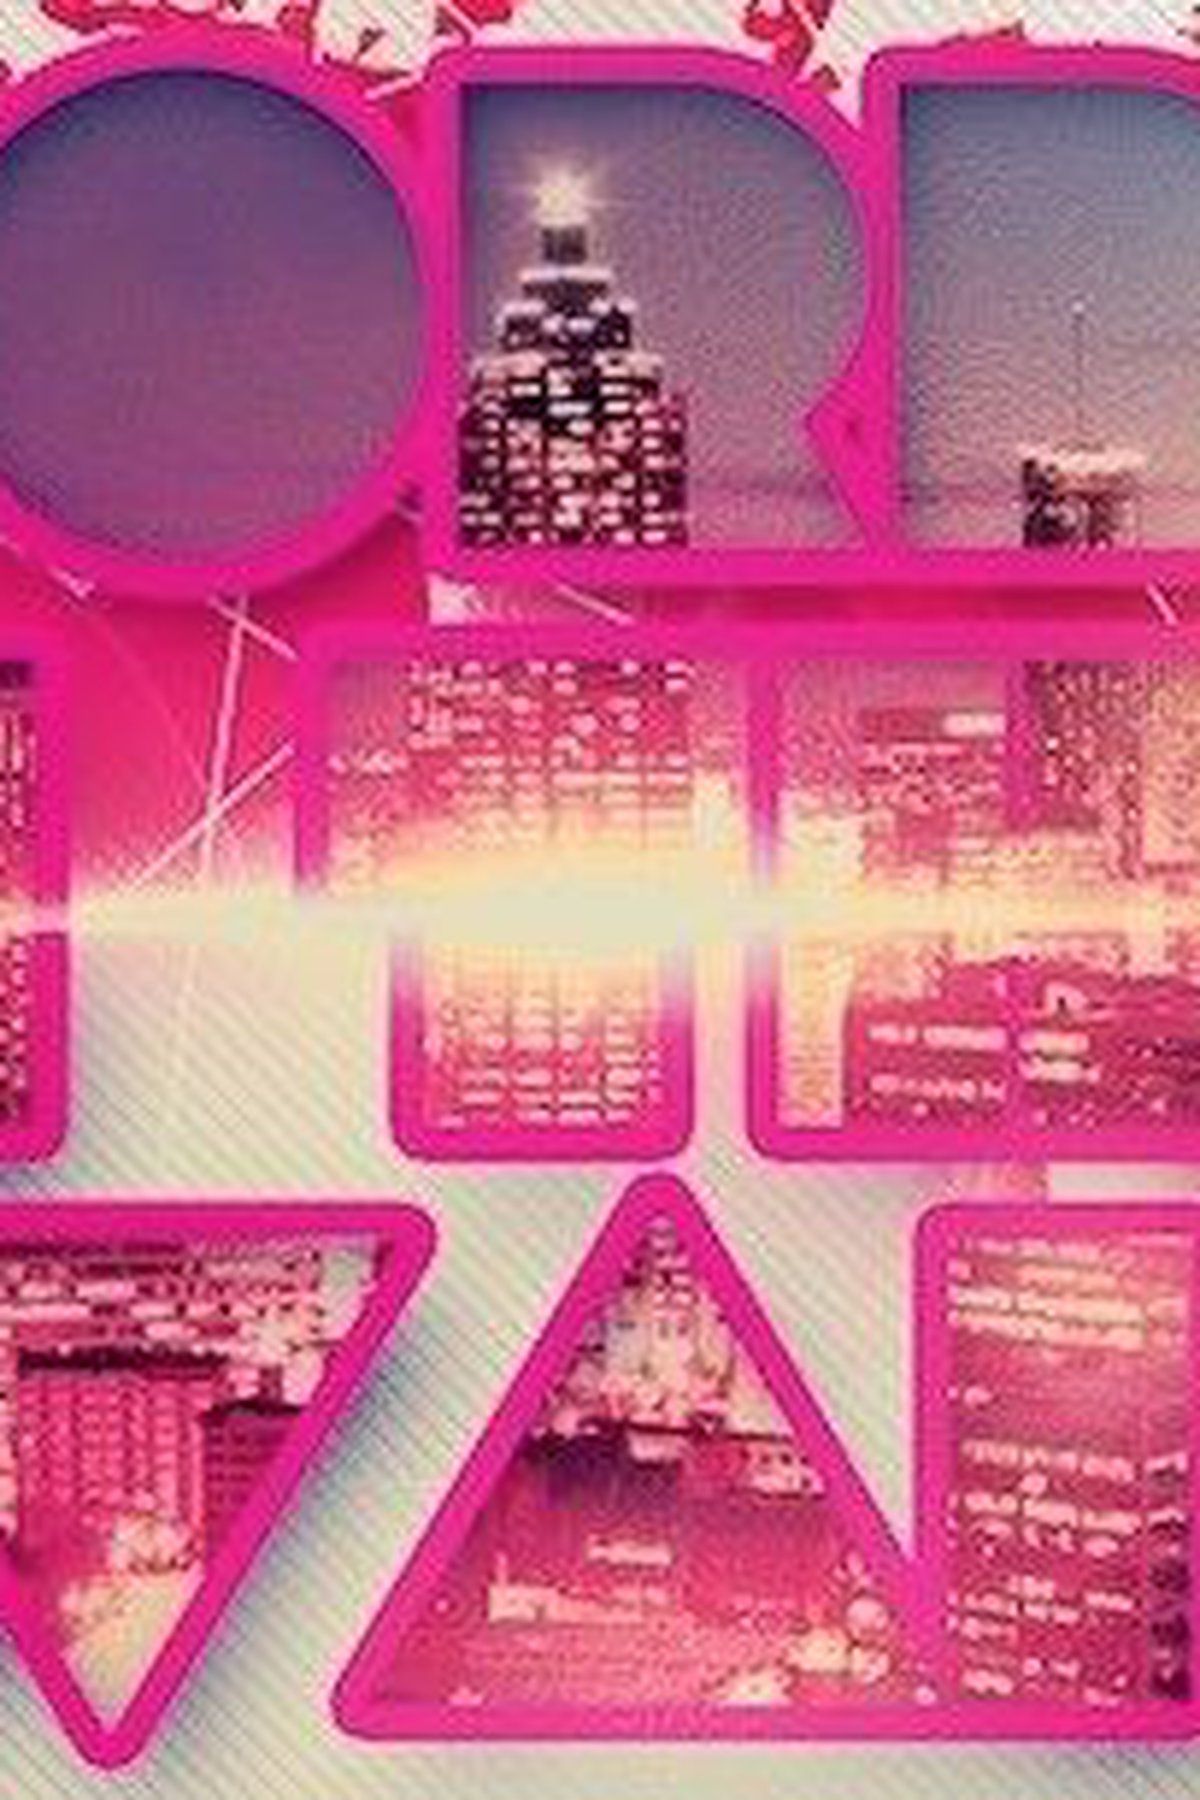 A creative wallpaper with a cityscape in pink. - 2000s, Barbie